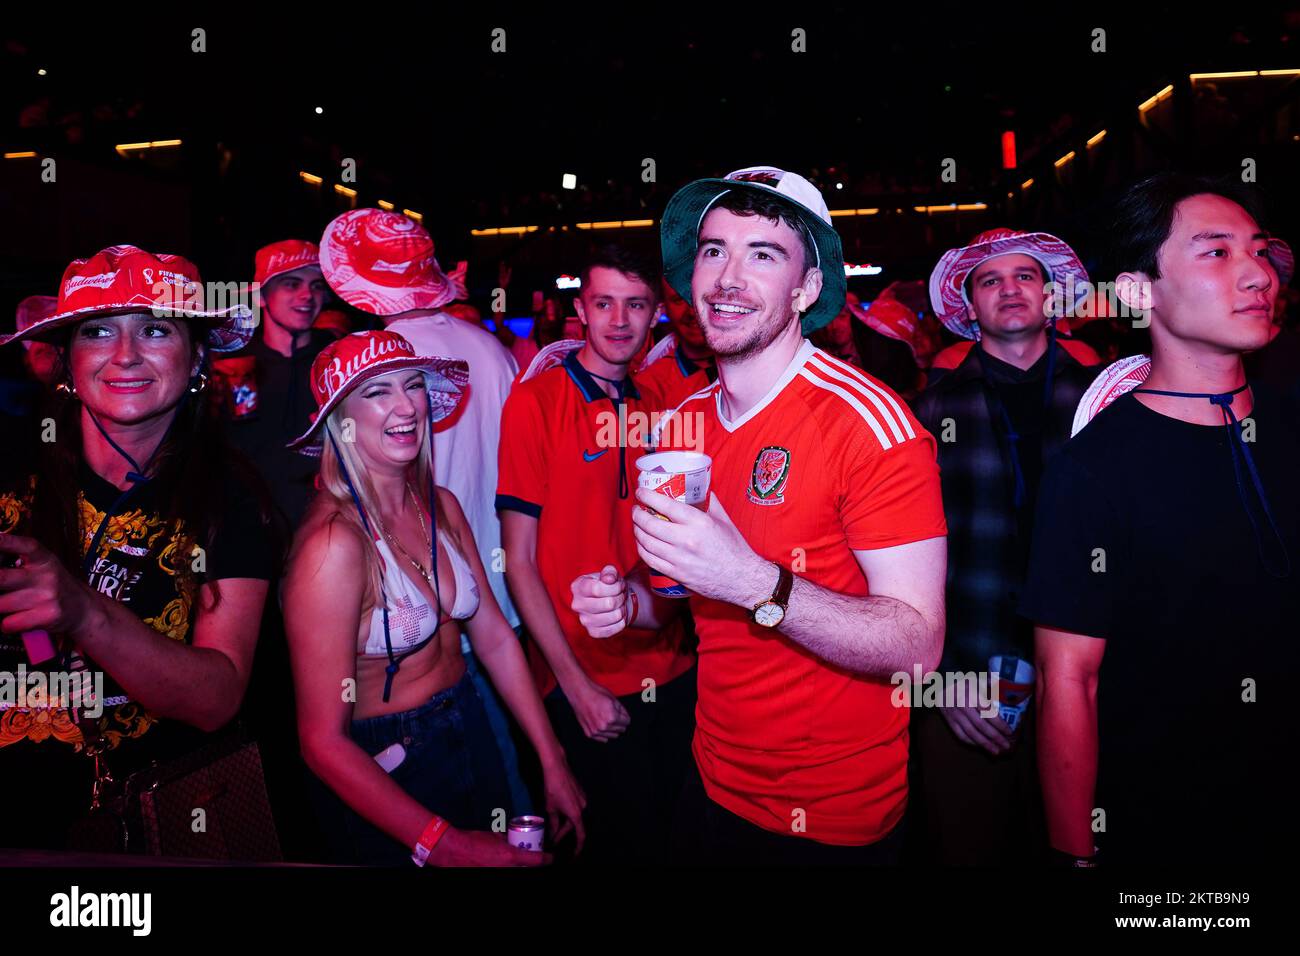 Wales fans react at the Budweiser Fan Festival London at Outernet, during a screening of the FIFA World Cup Group B match between Wales and England. Picture date: Tuesday November 29, 2022. Stock Photo